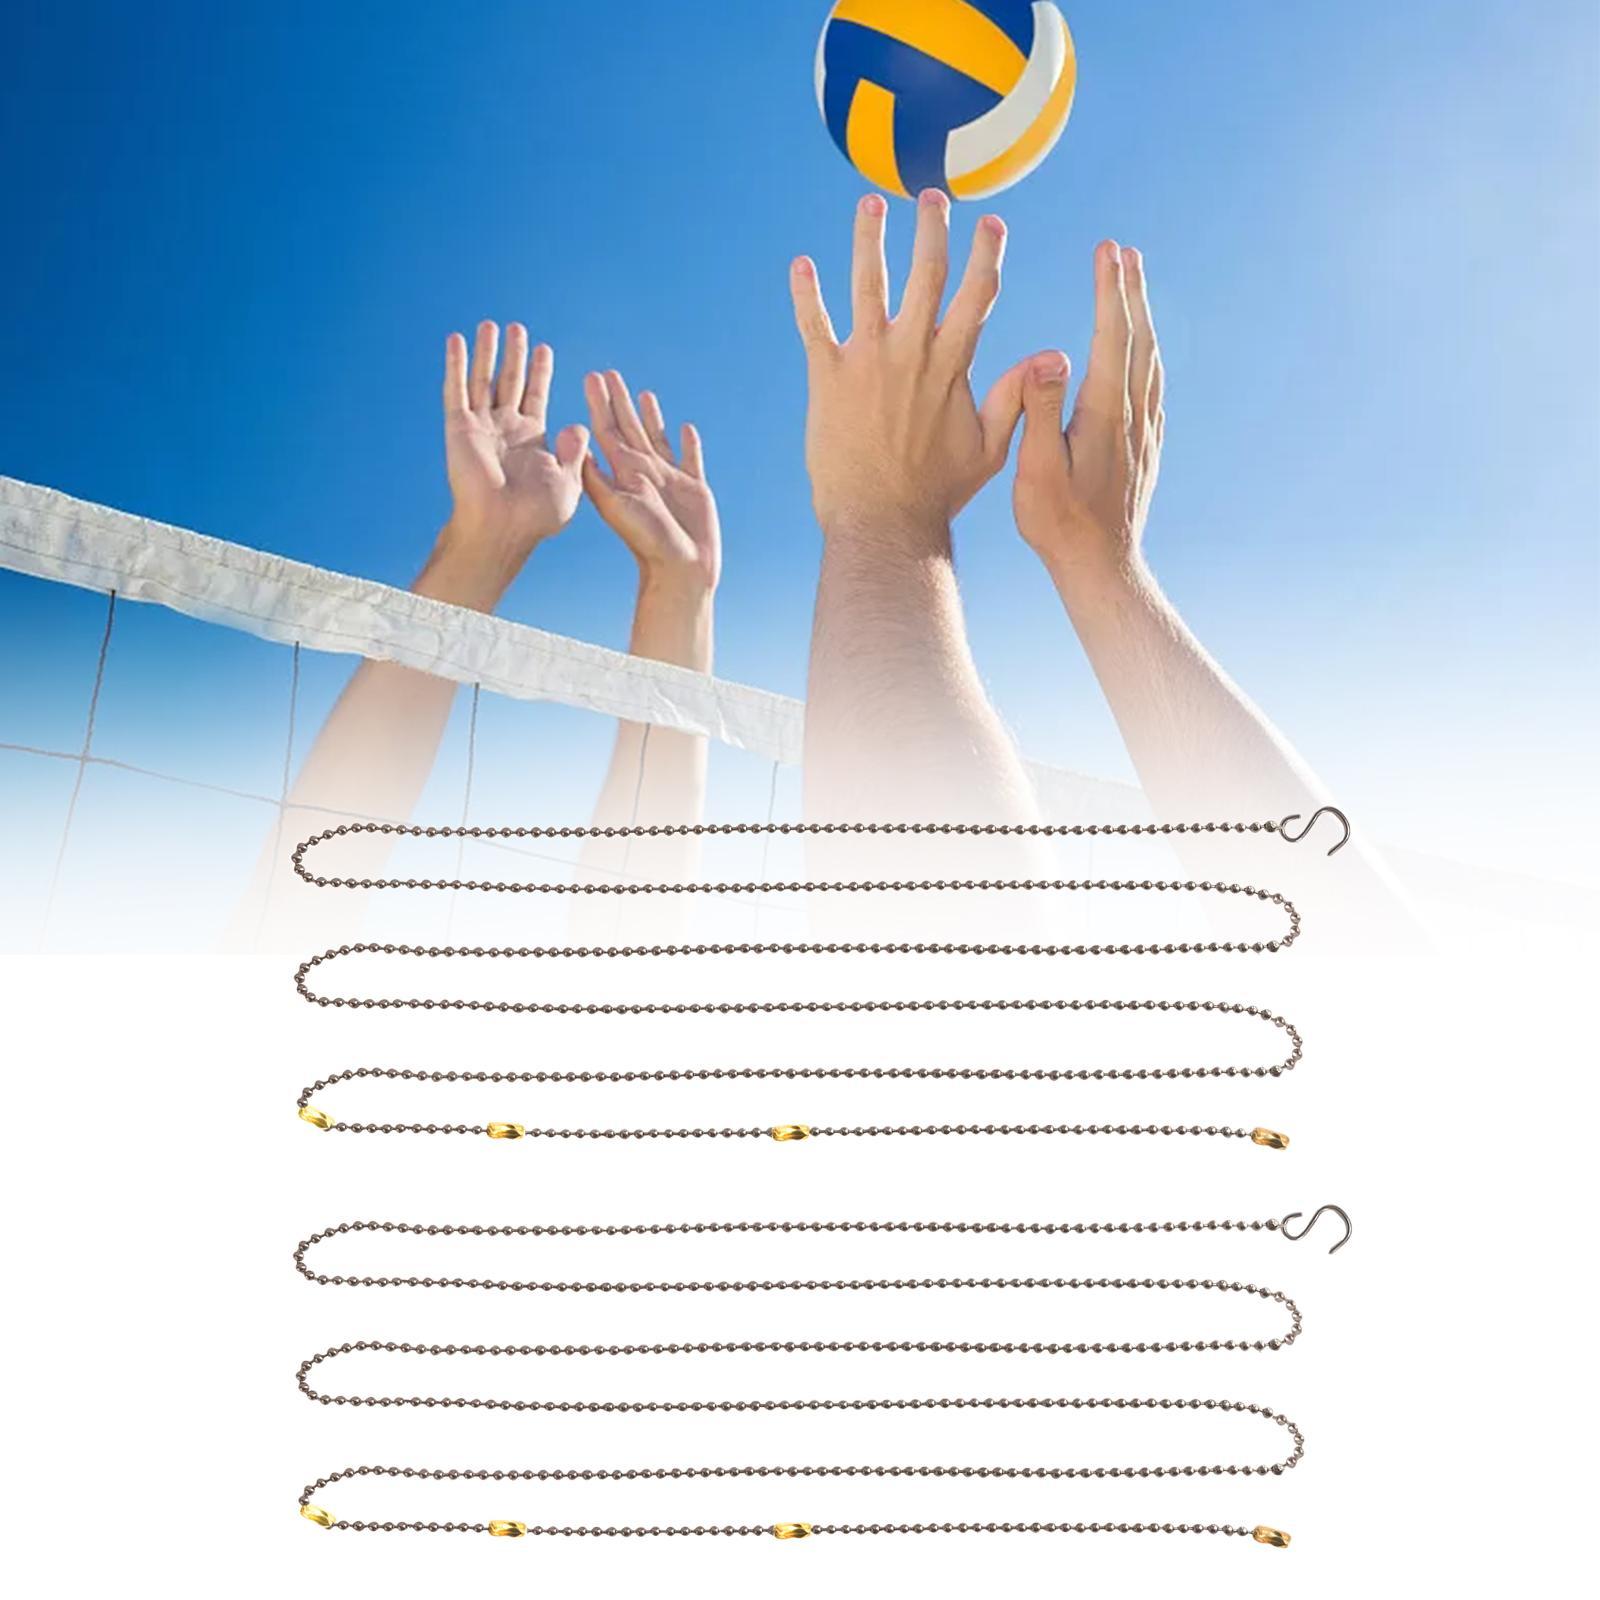 2.5M Length Volleyball Net Measure Chain with Instruction Manual Referee Equipment Volleyball Net Setter Chain for Competitions Team Sports